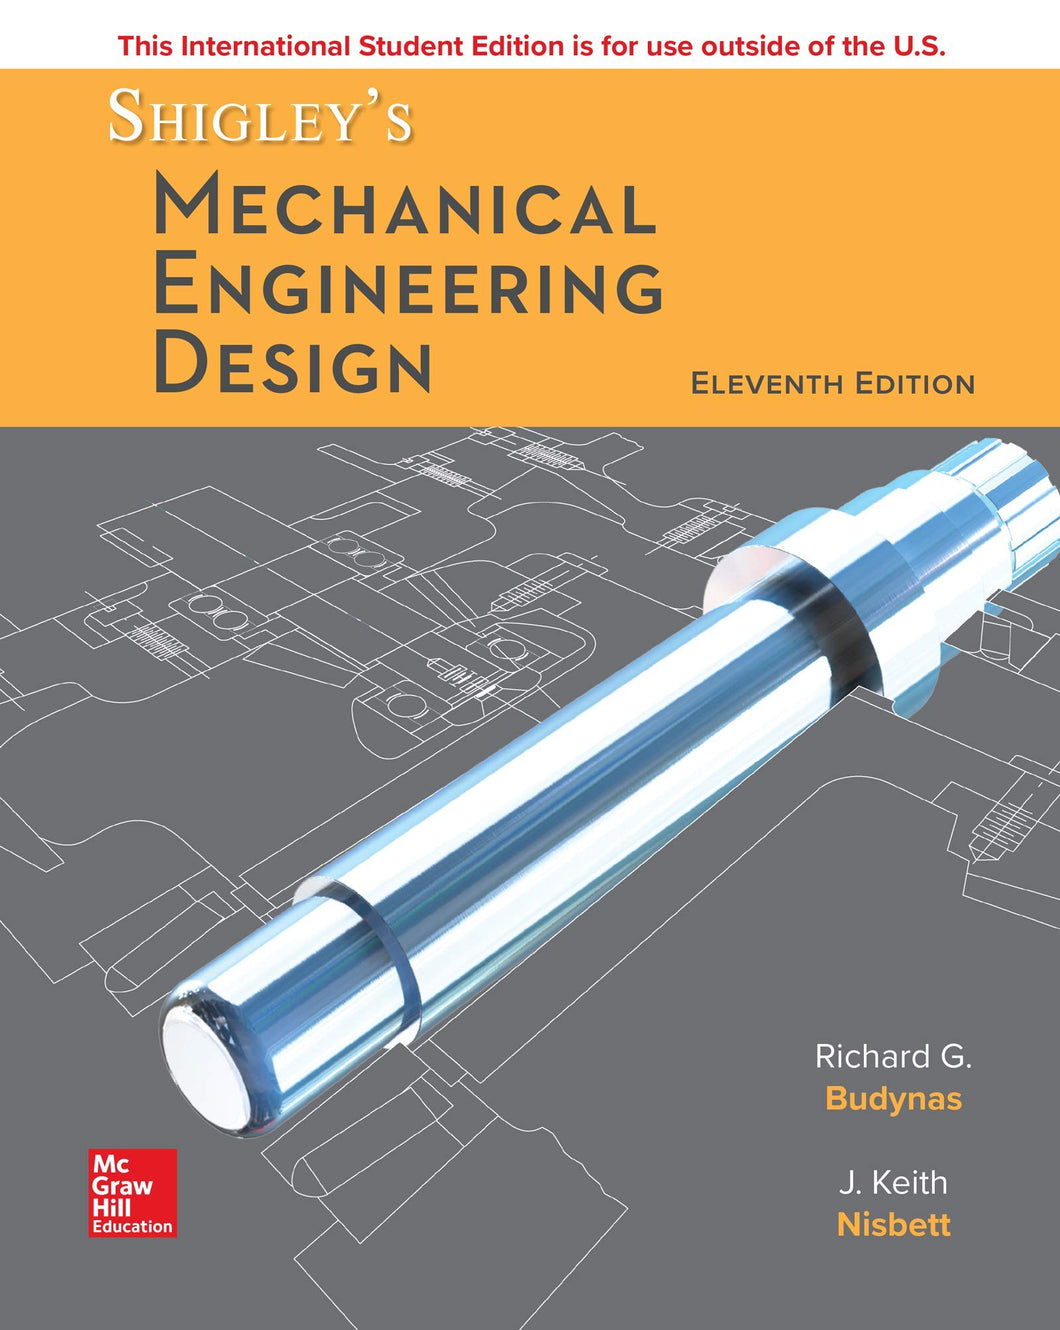 Shigley's Mechanical Engineering Design [Paperback] 11e by Budynas - Smiling Bookstore